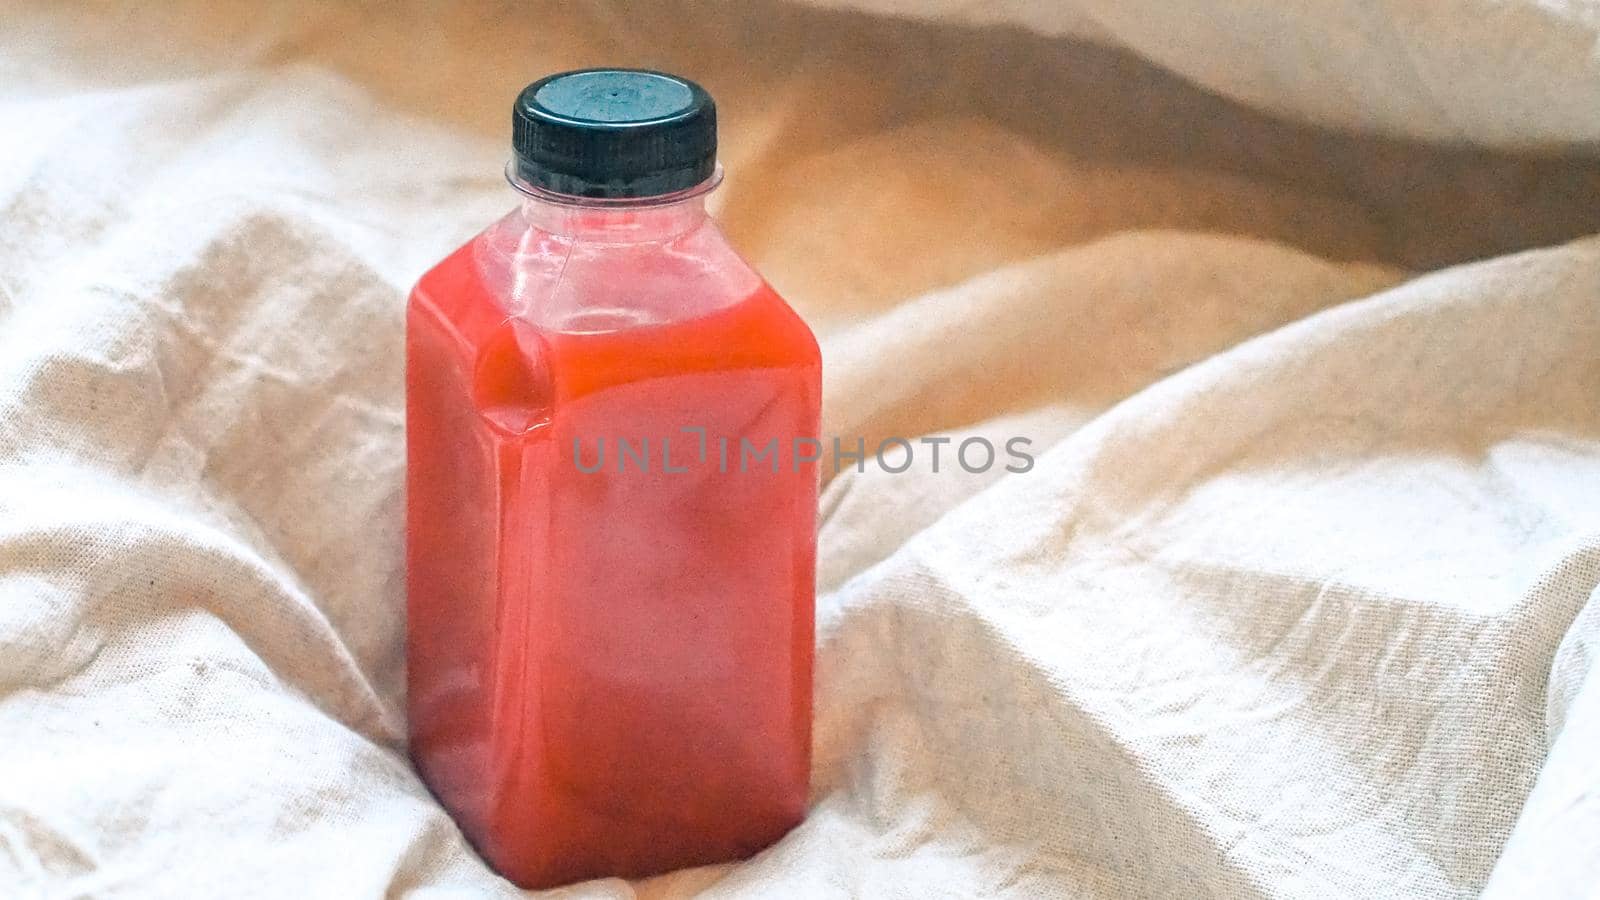 Healthy drink Cranberry juice in a bottle on linen background. Natural concept idea. Health idea.